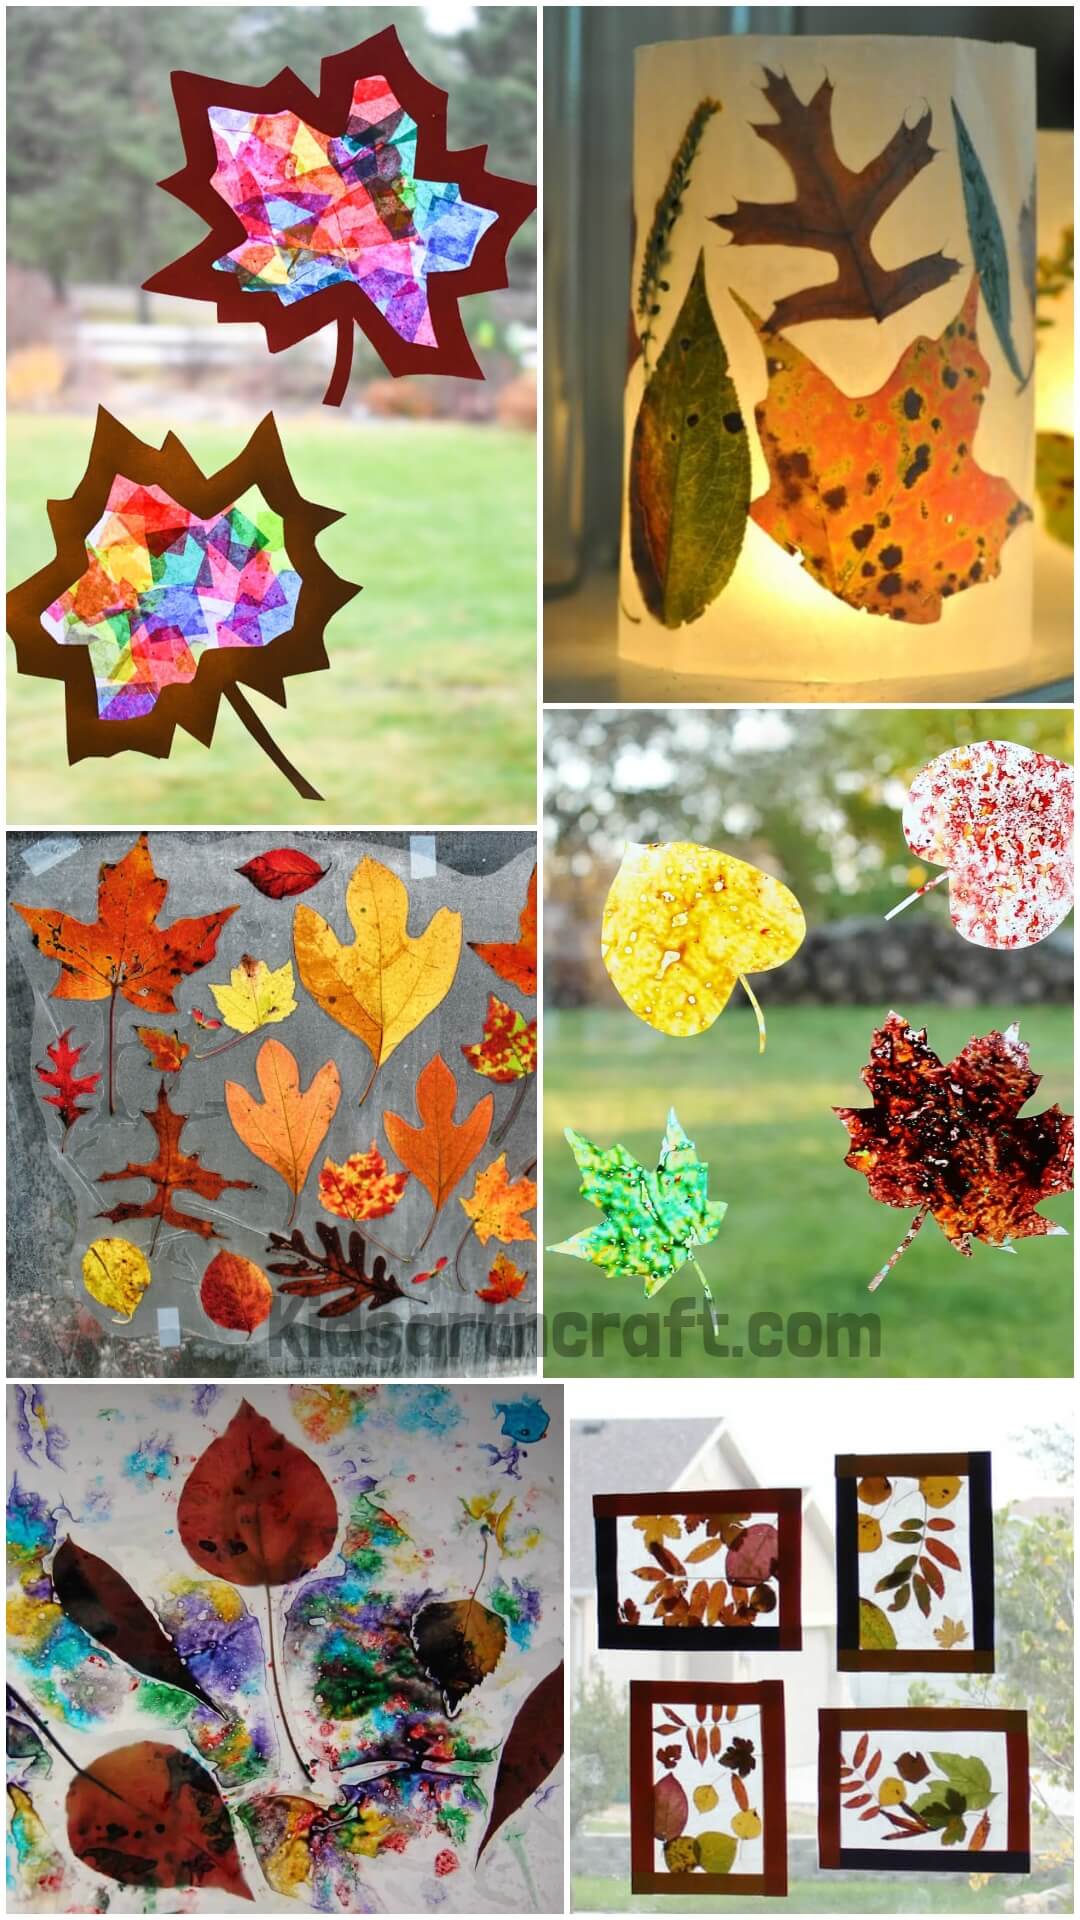 Wax paper crafts with leaves